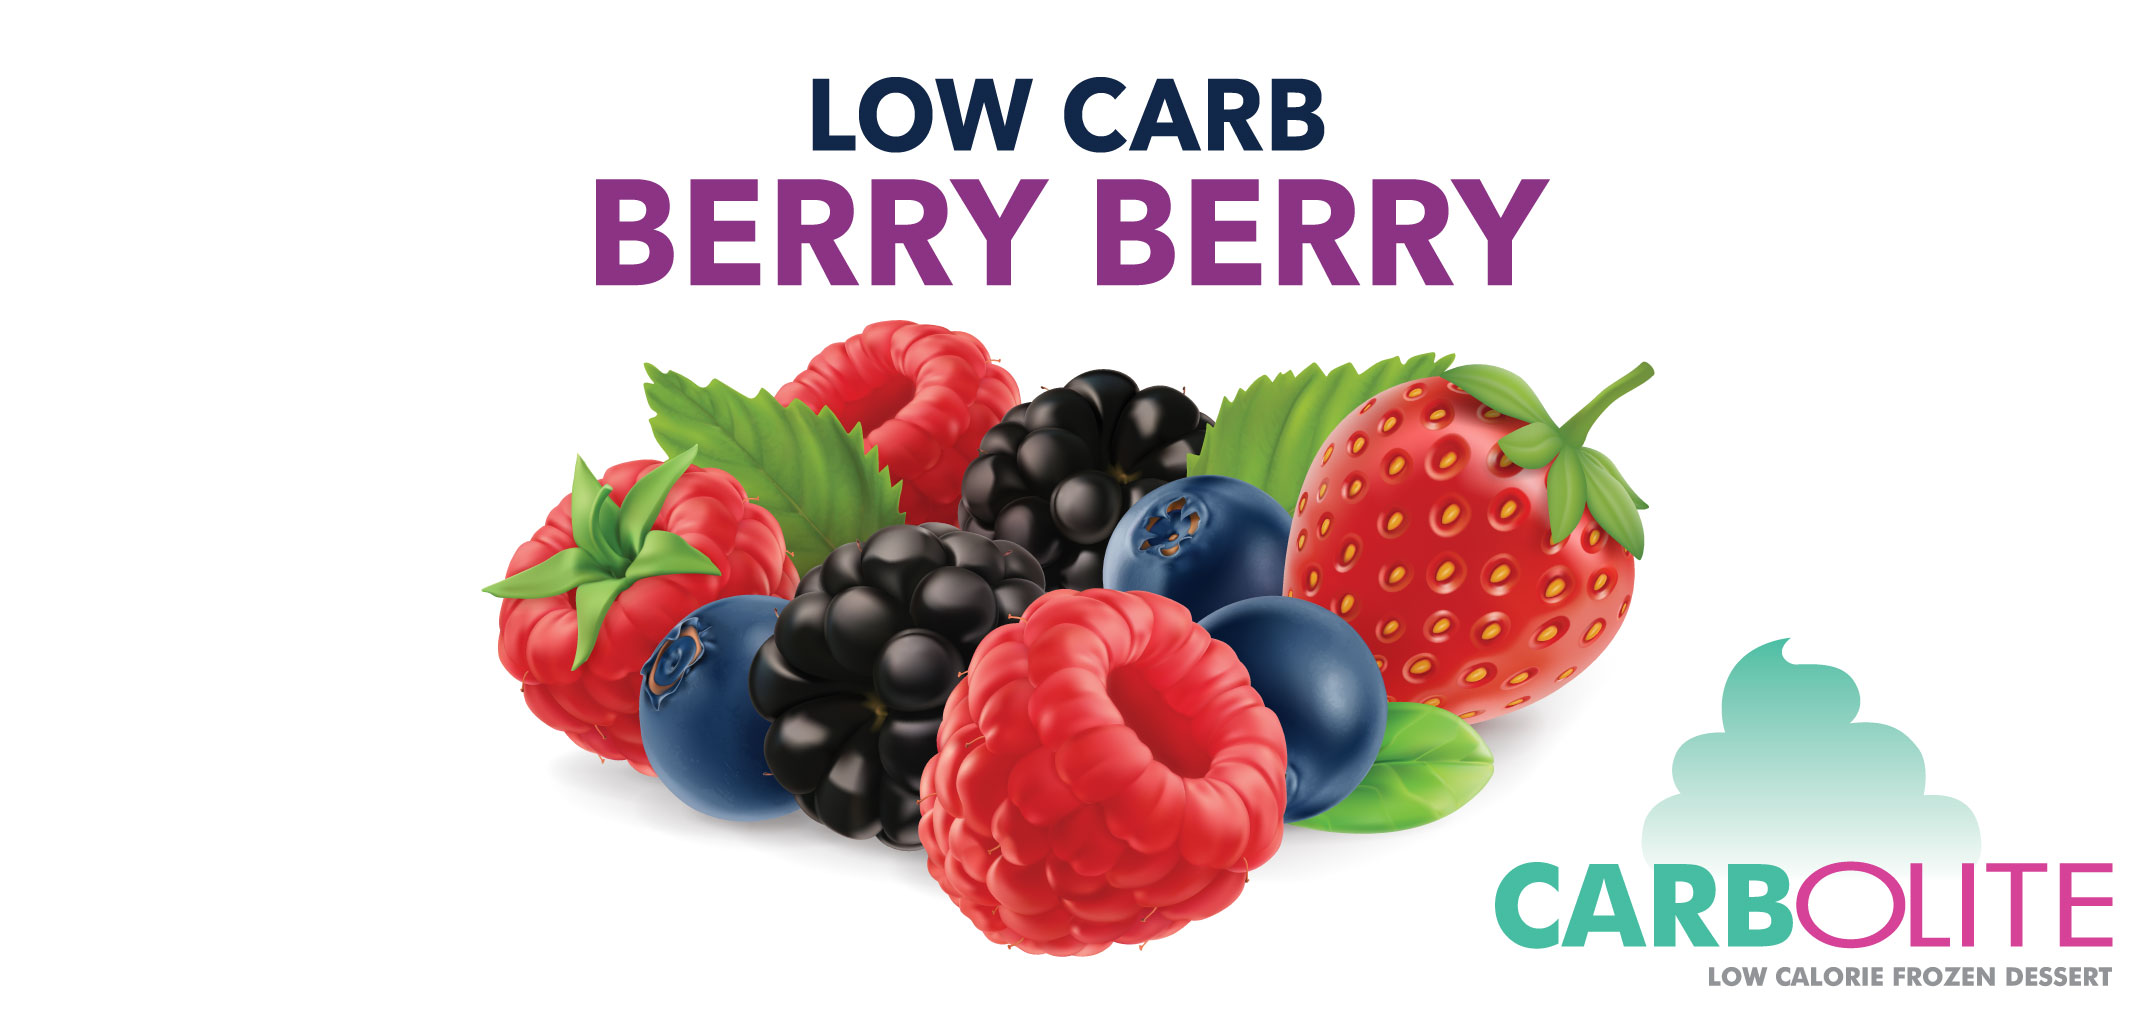 carbolite low carb no sugar added berry berry label image